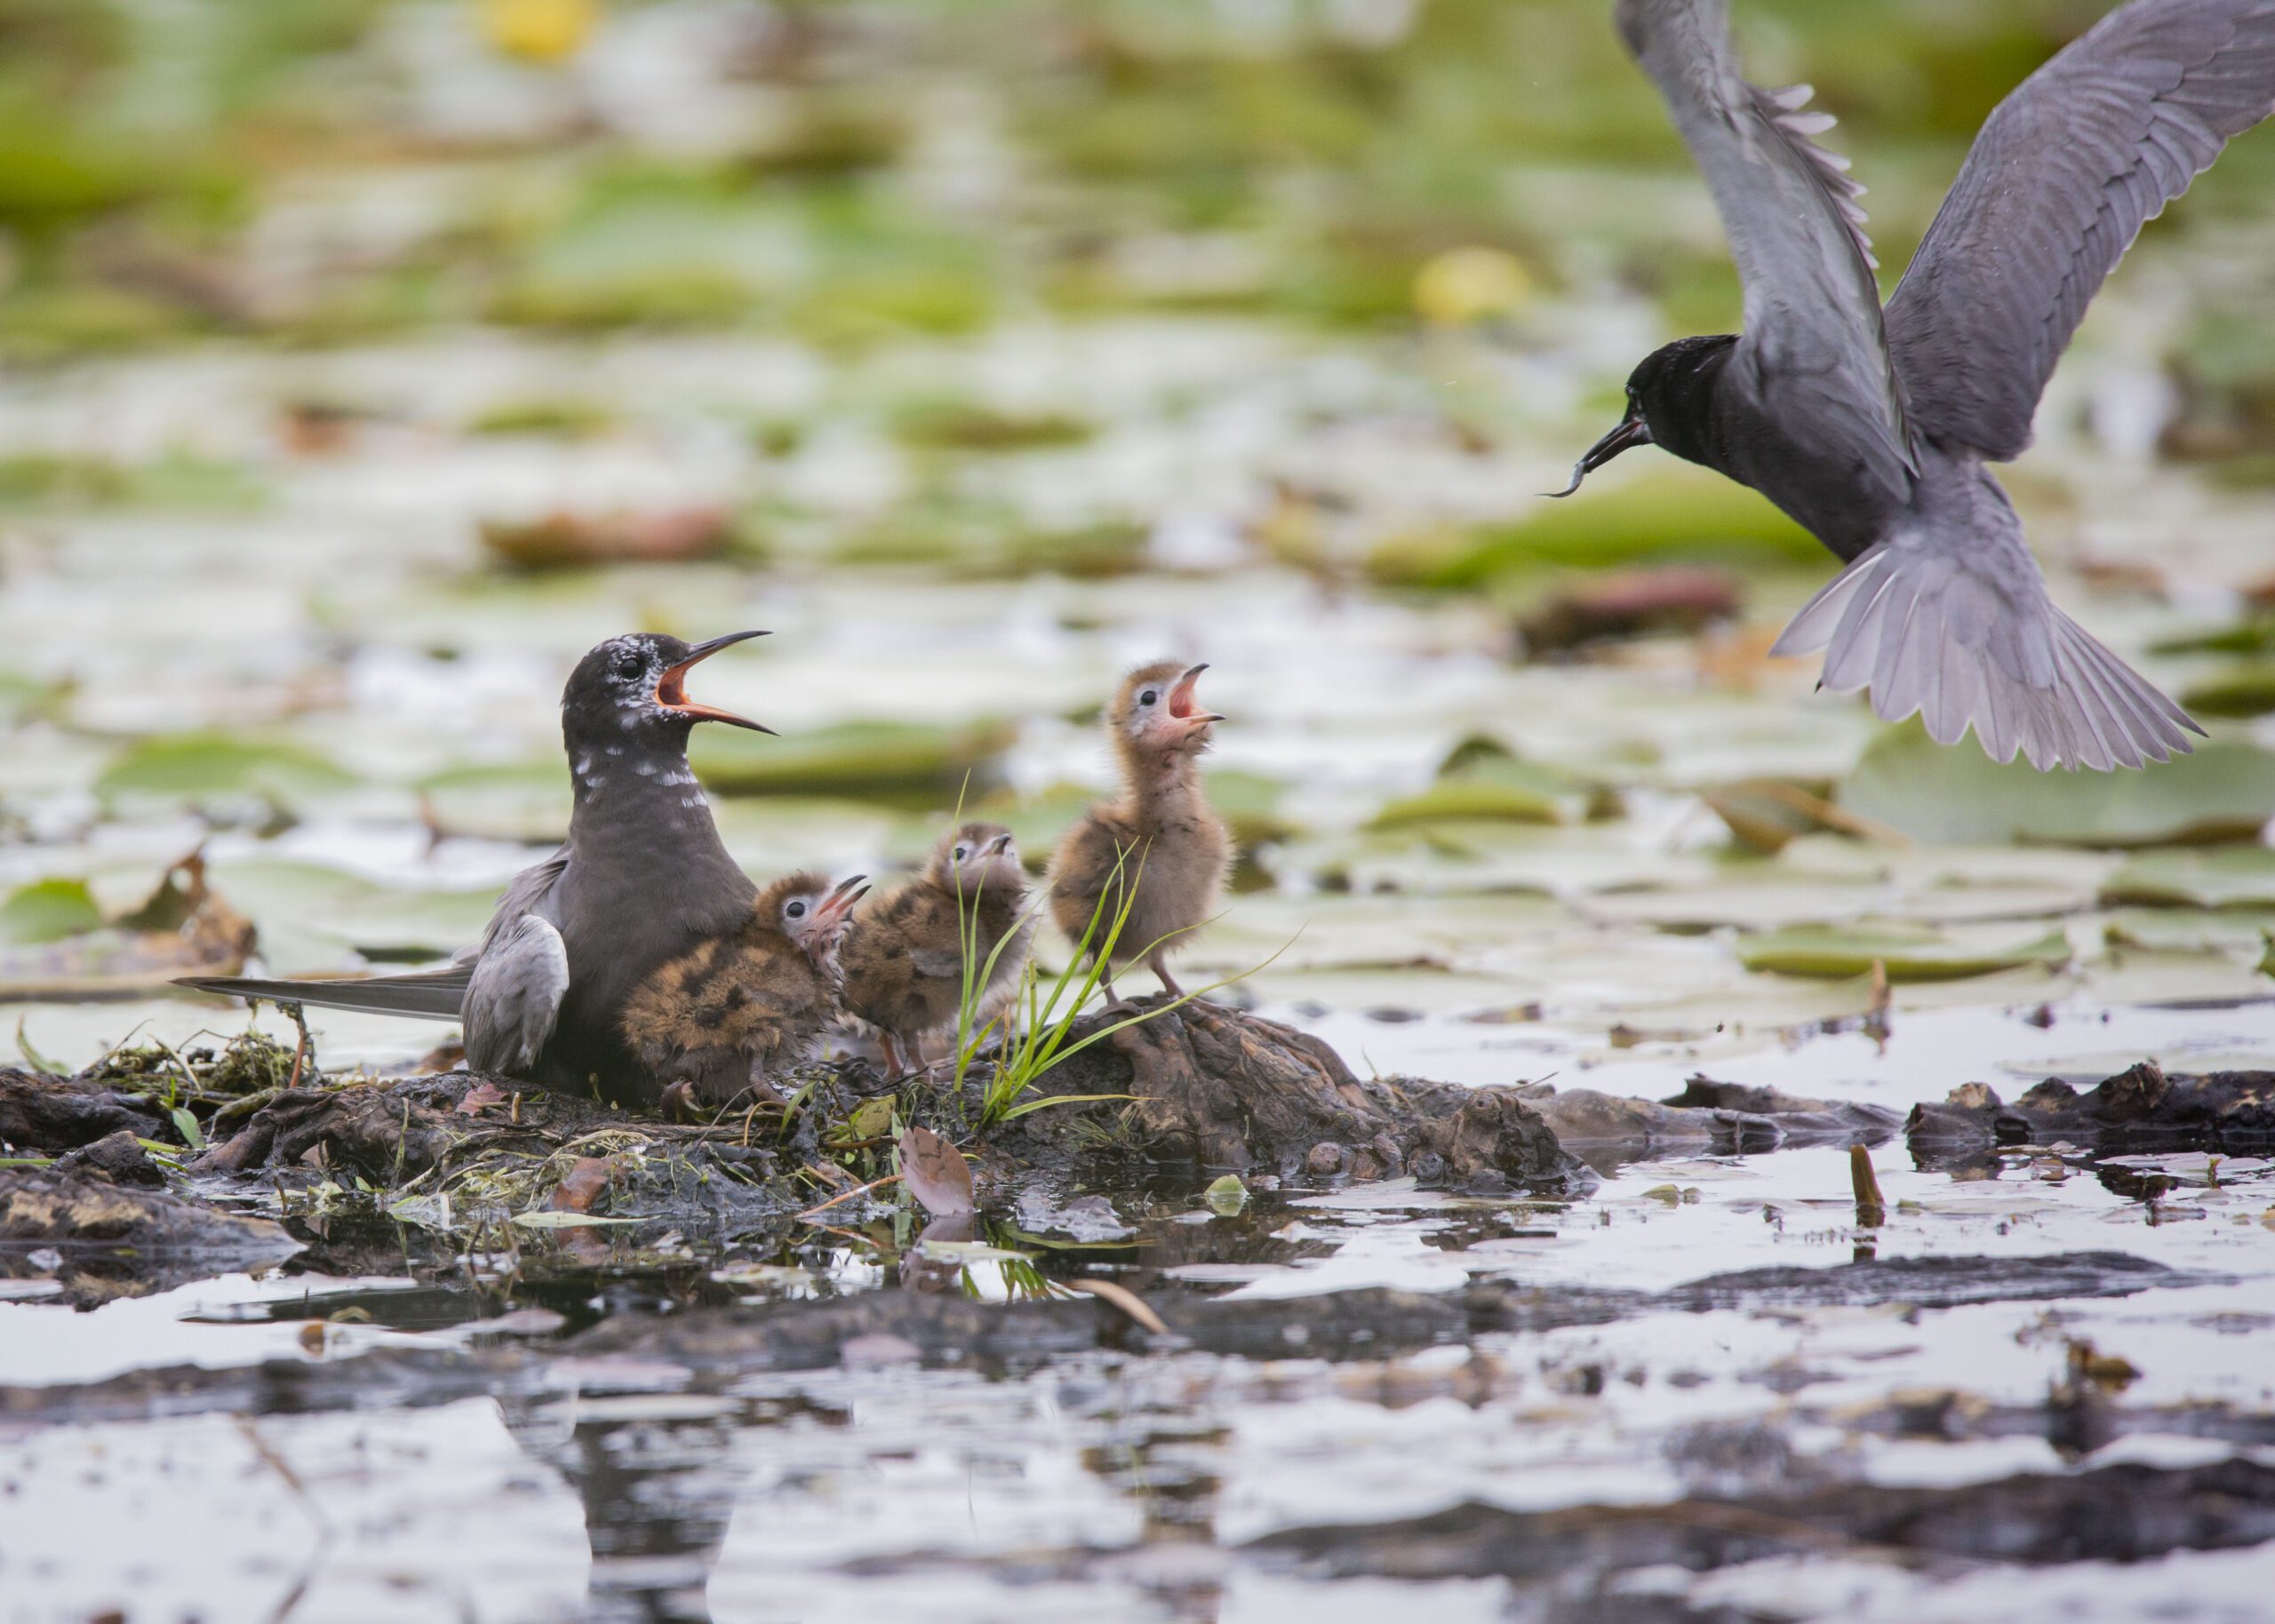 A black bird flies towards its chicks and partner with food.